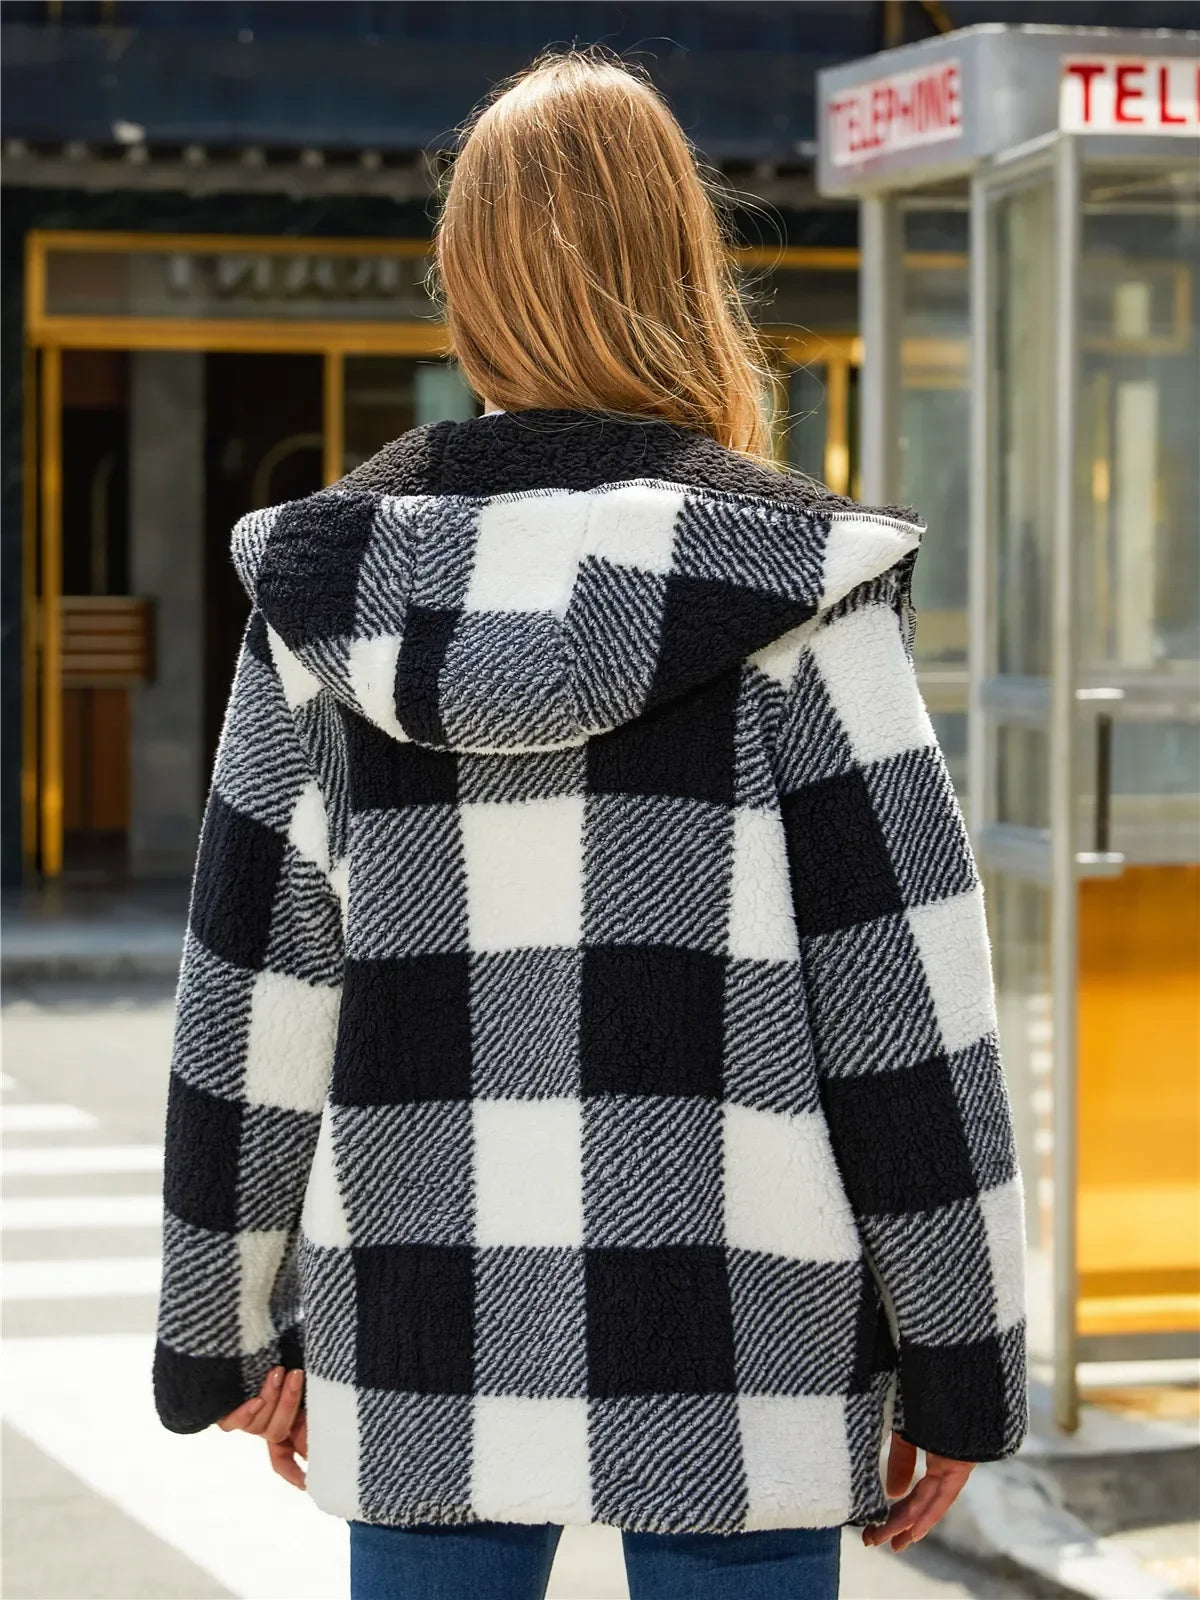 Winter Coats Thick Warm Clothing Casual Hooded Bubble Velvet Black White Plaid Jacket - TaMNz